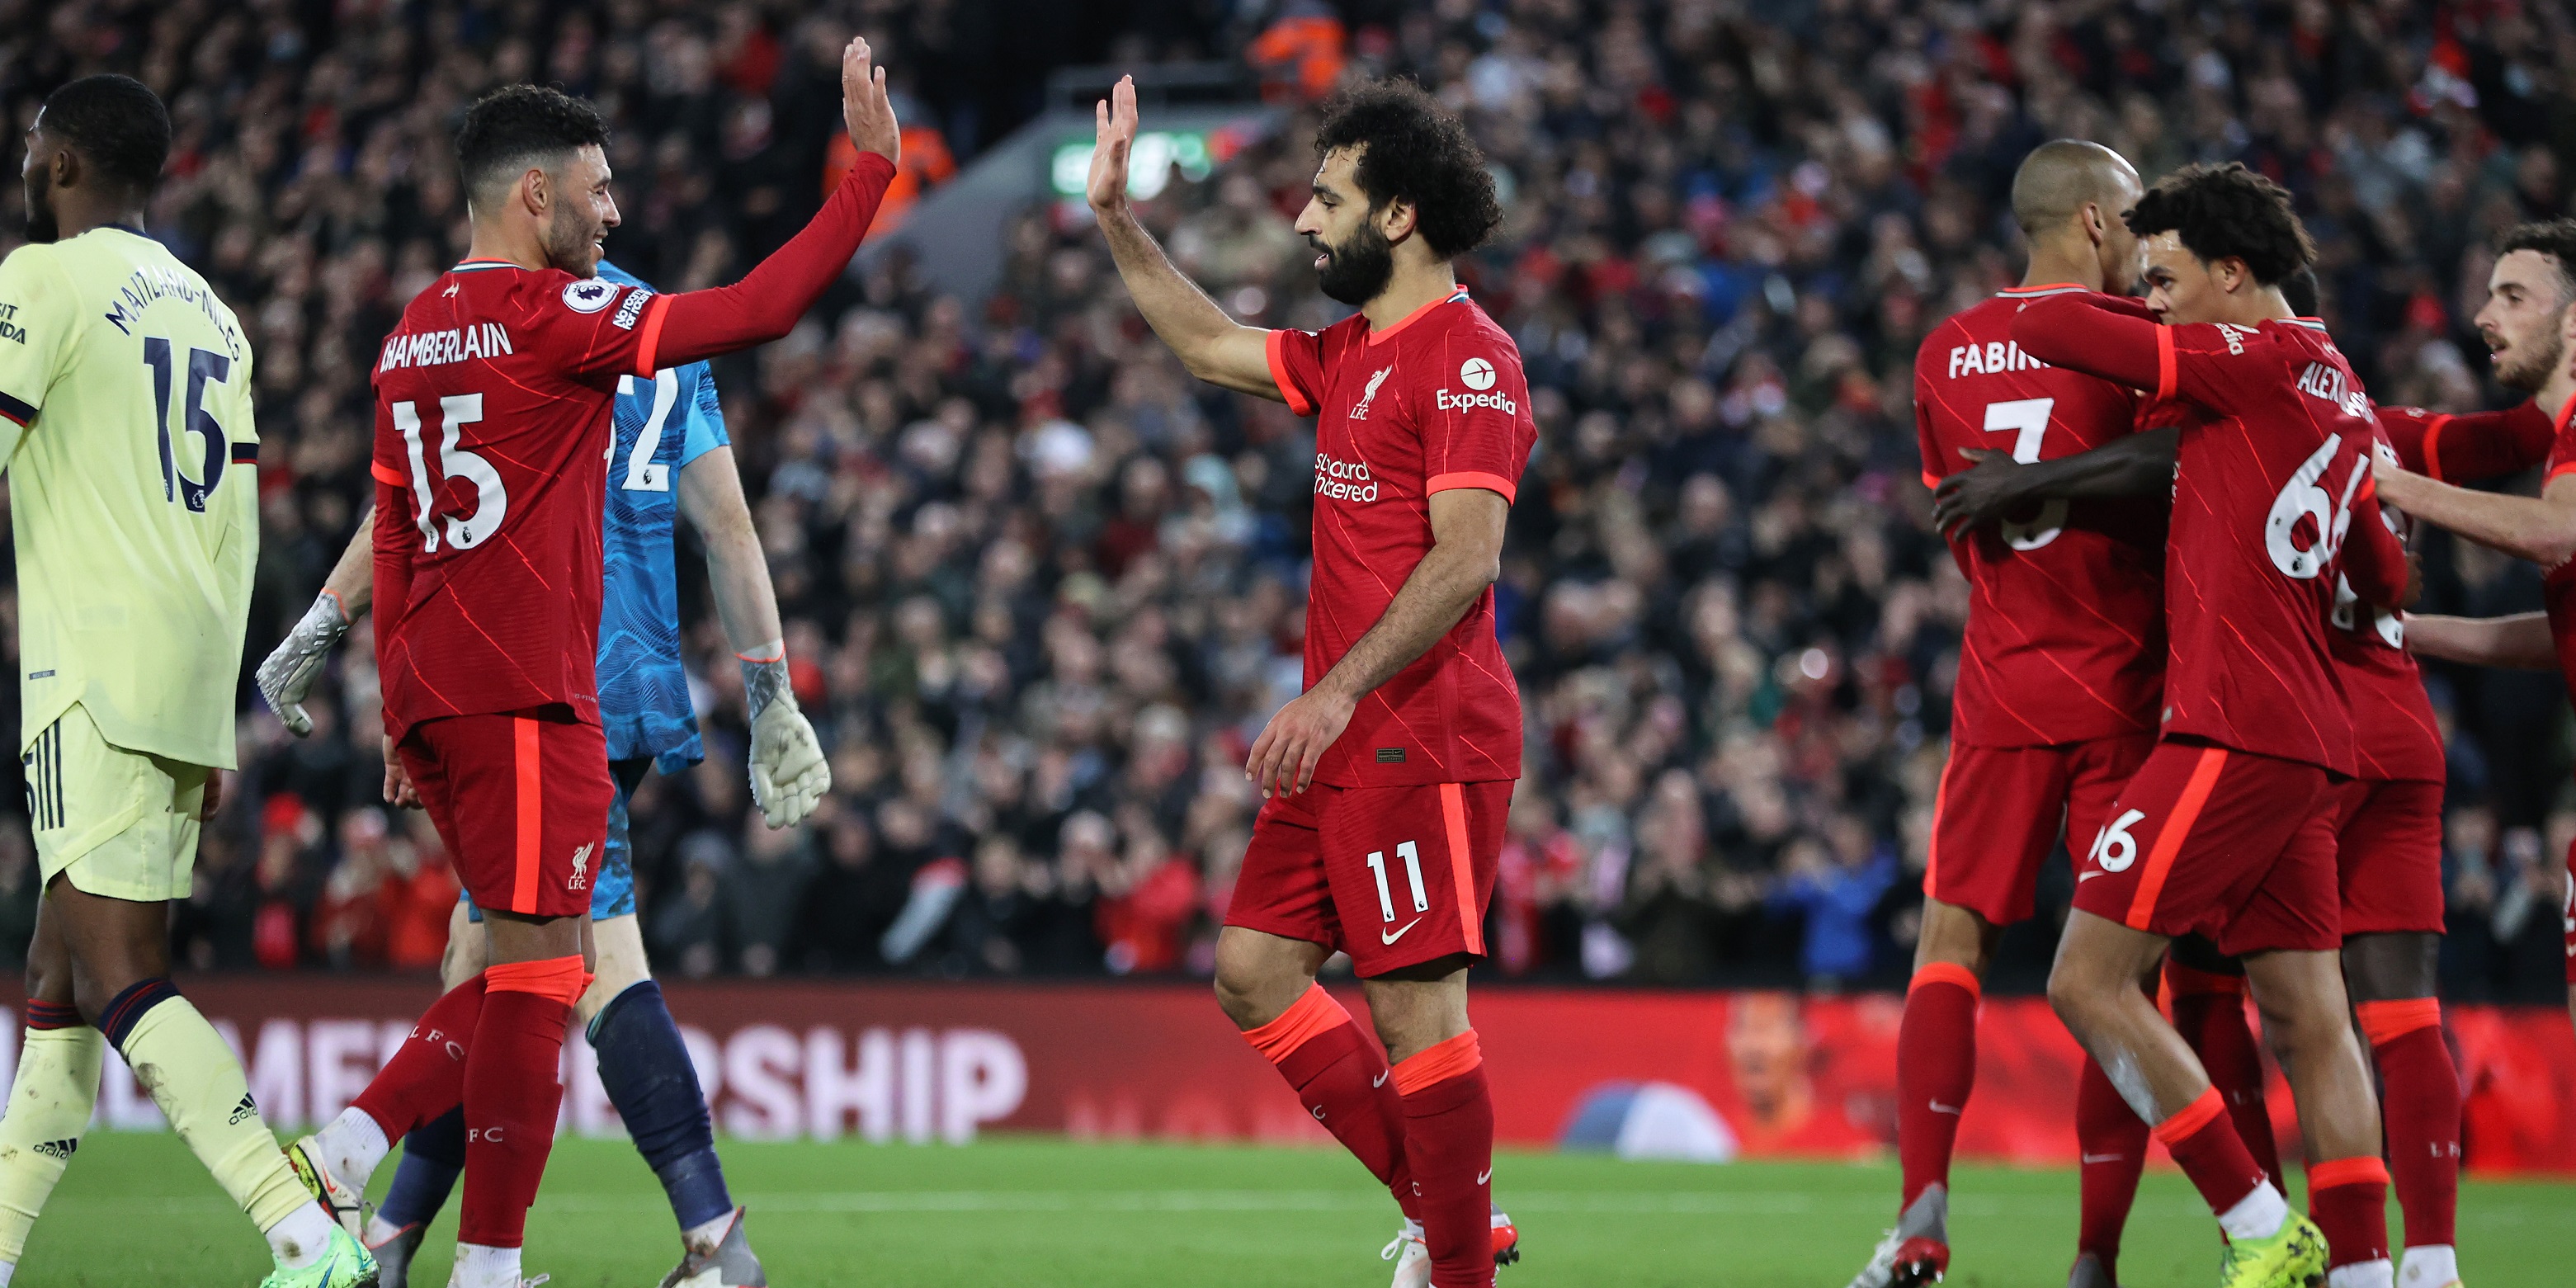 ‘Best game for ages’ – These Liverpool fans single out 28-year-old Liverpool star who’s a ‘joy to watch’ from Arsenal win